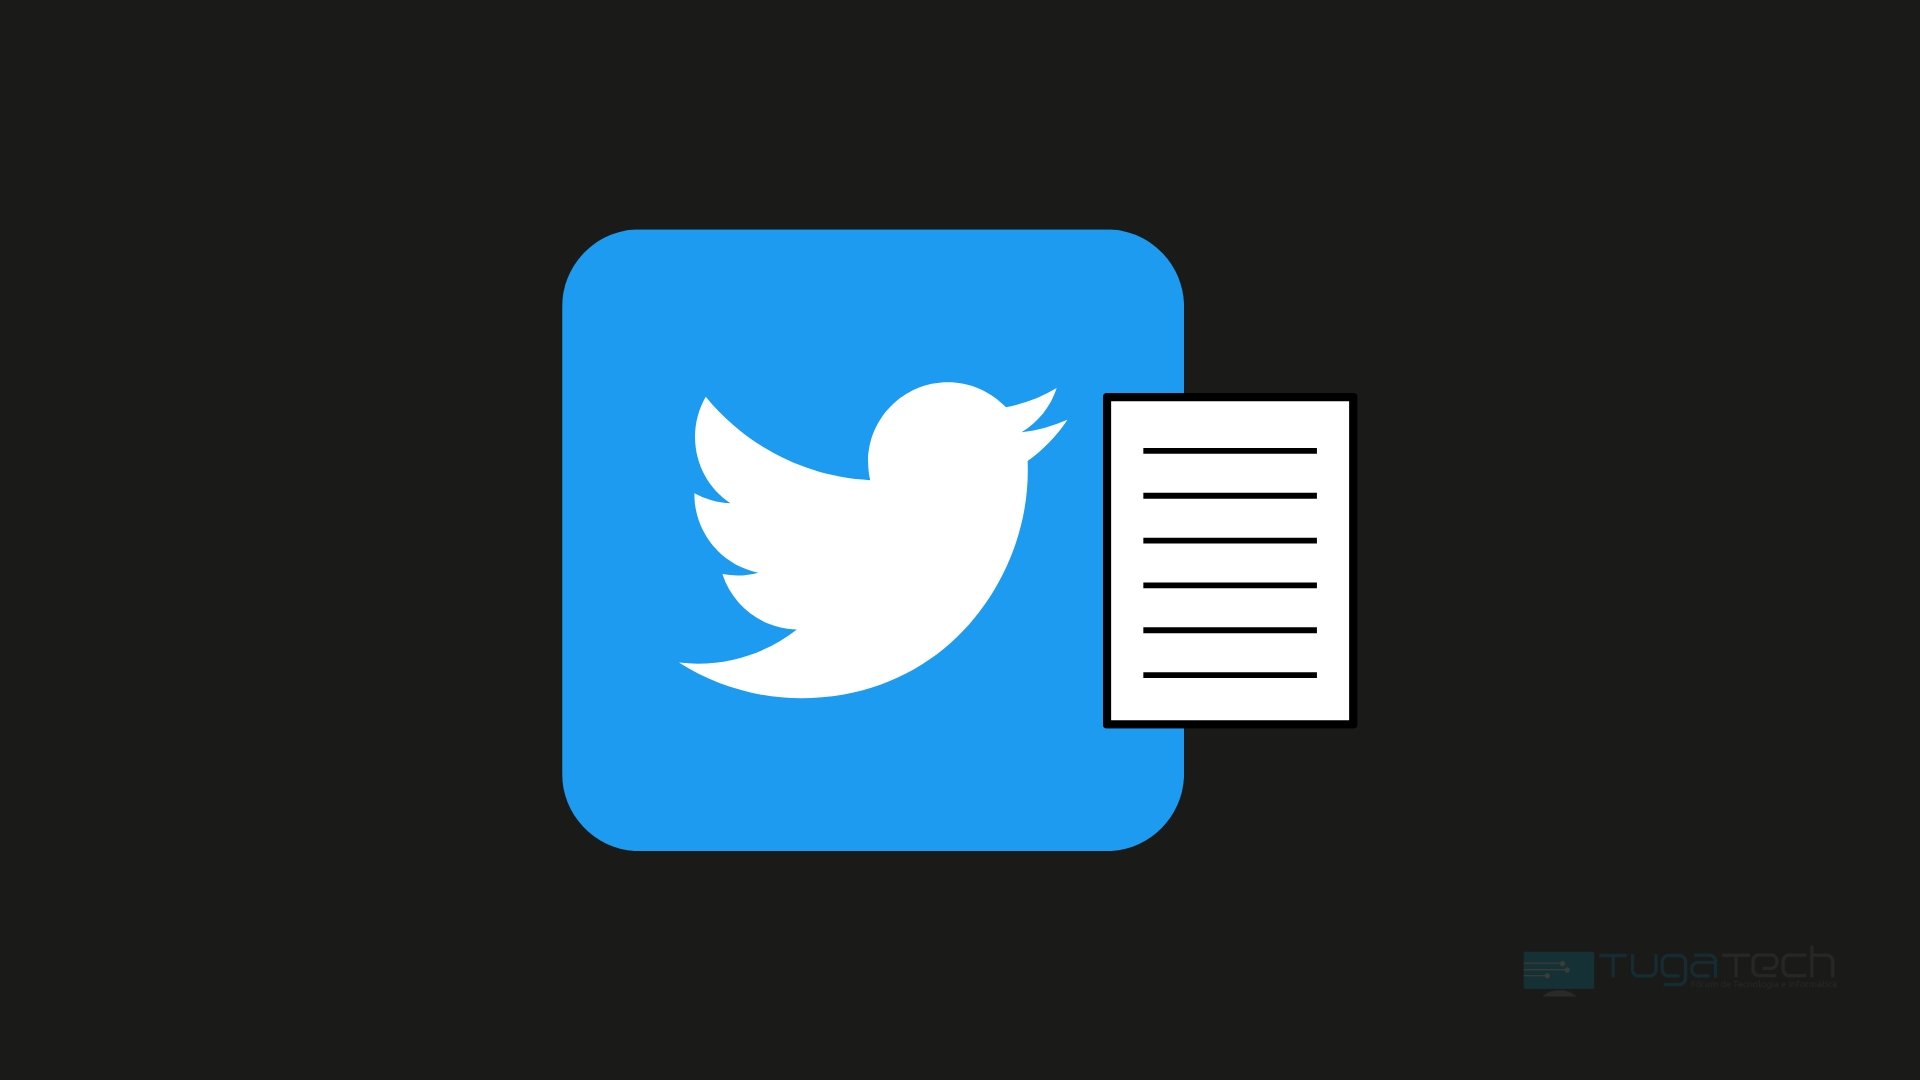 Twitter articles